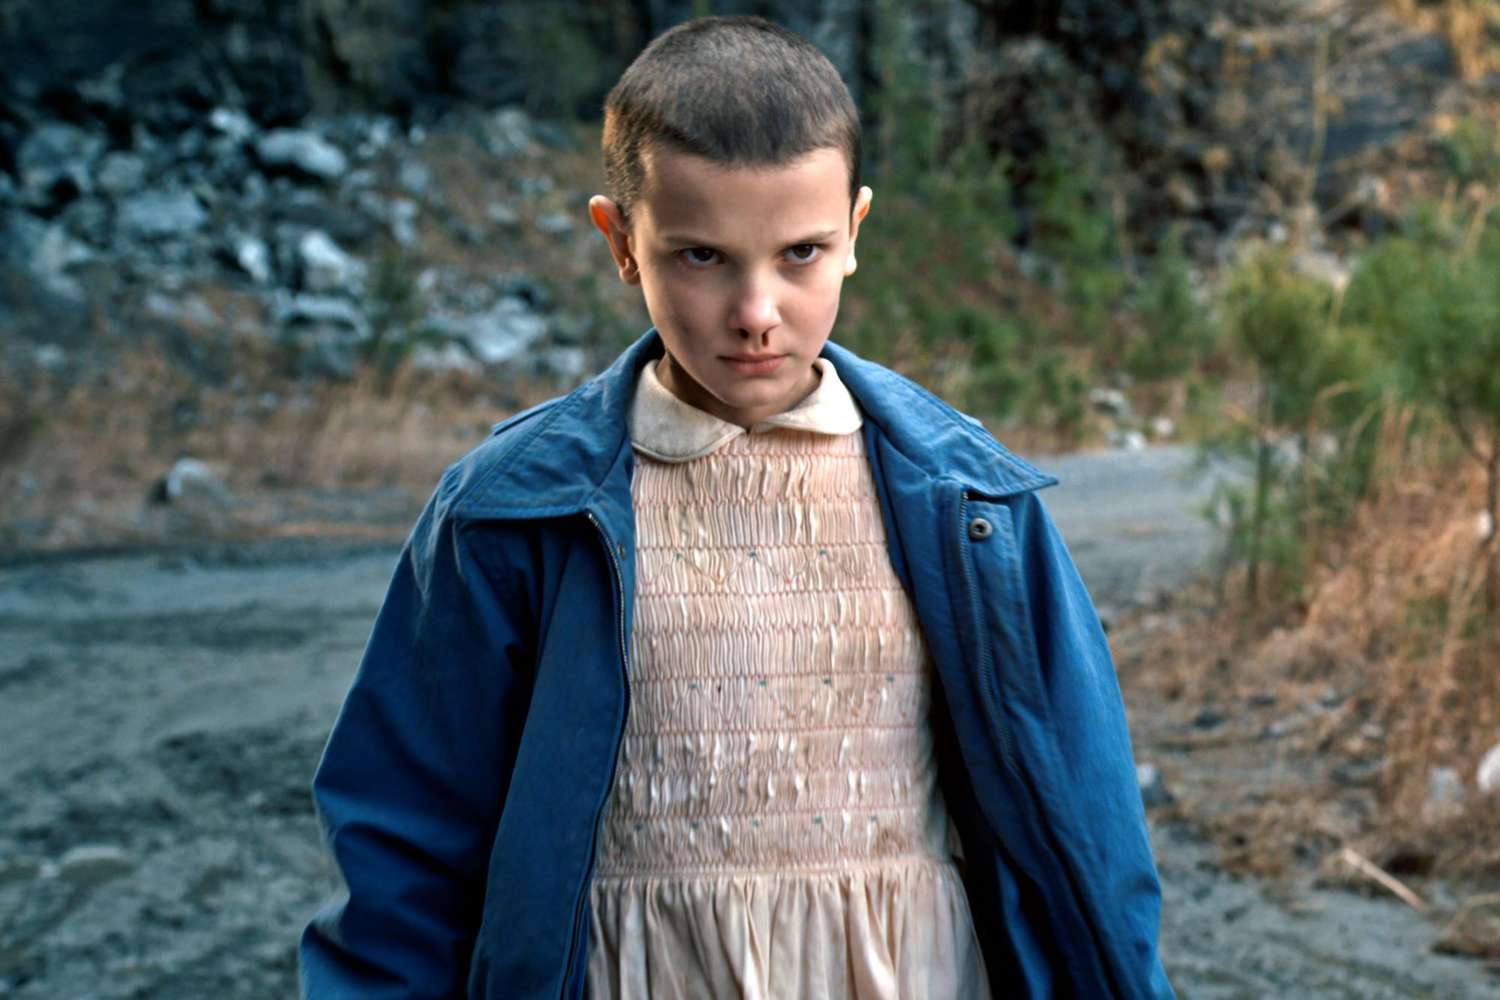 The Duffer Brothers initially planned for Stranger Things to last only one season and Eleven’s death. But the possibility of more episodes made them cancel her death.